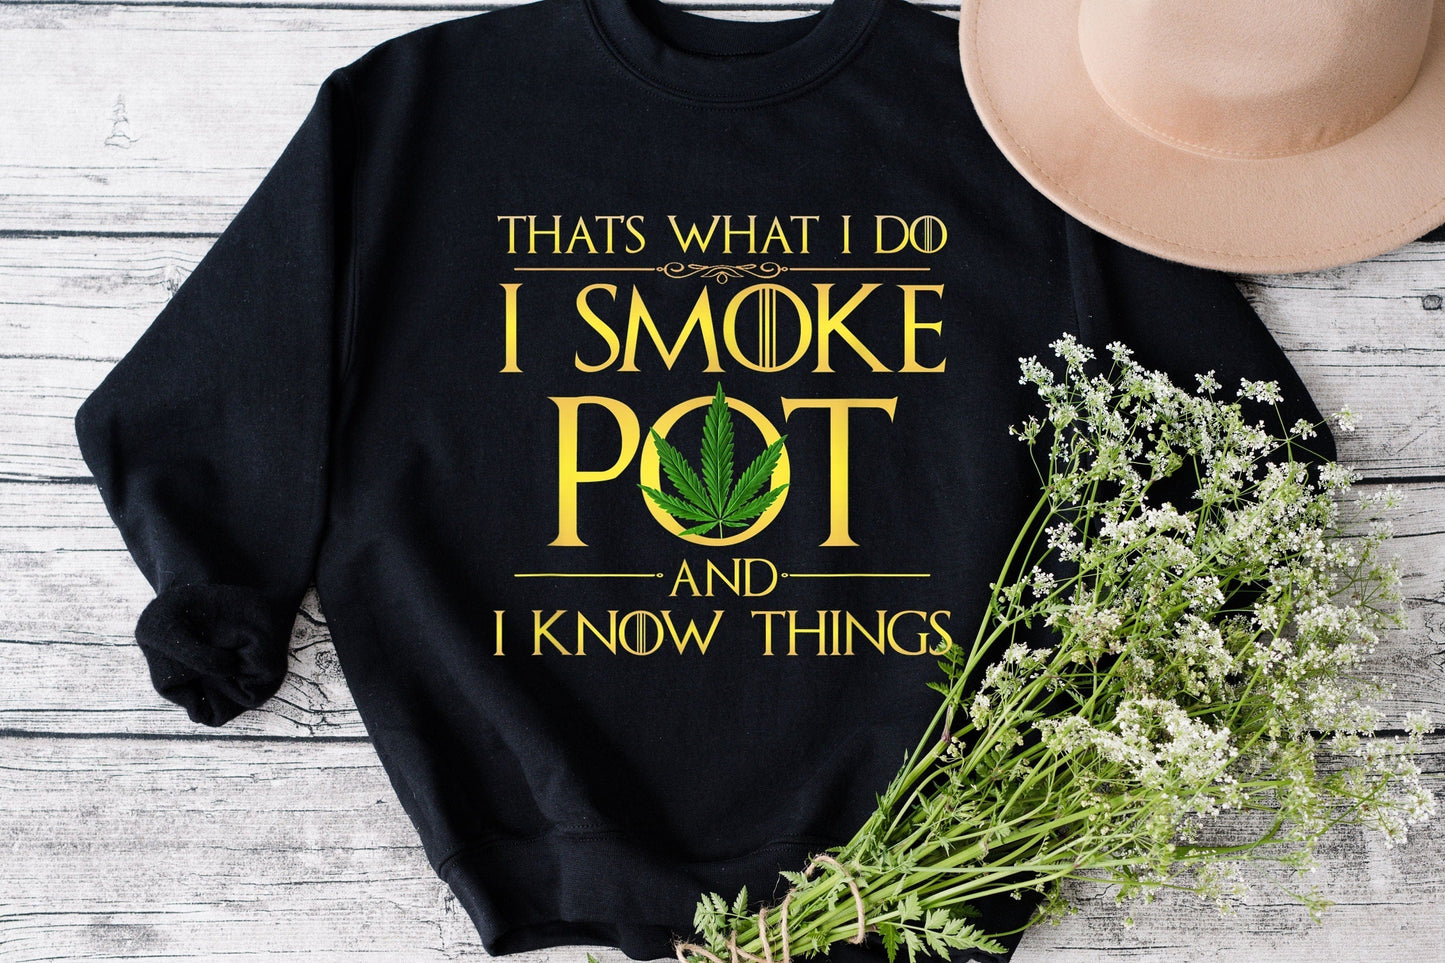 That's What I Do, I Smoke Pot and Know Things, Funny Stoner Shirt